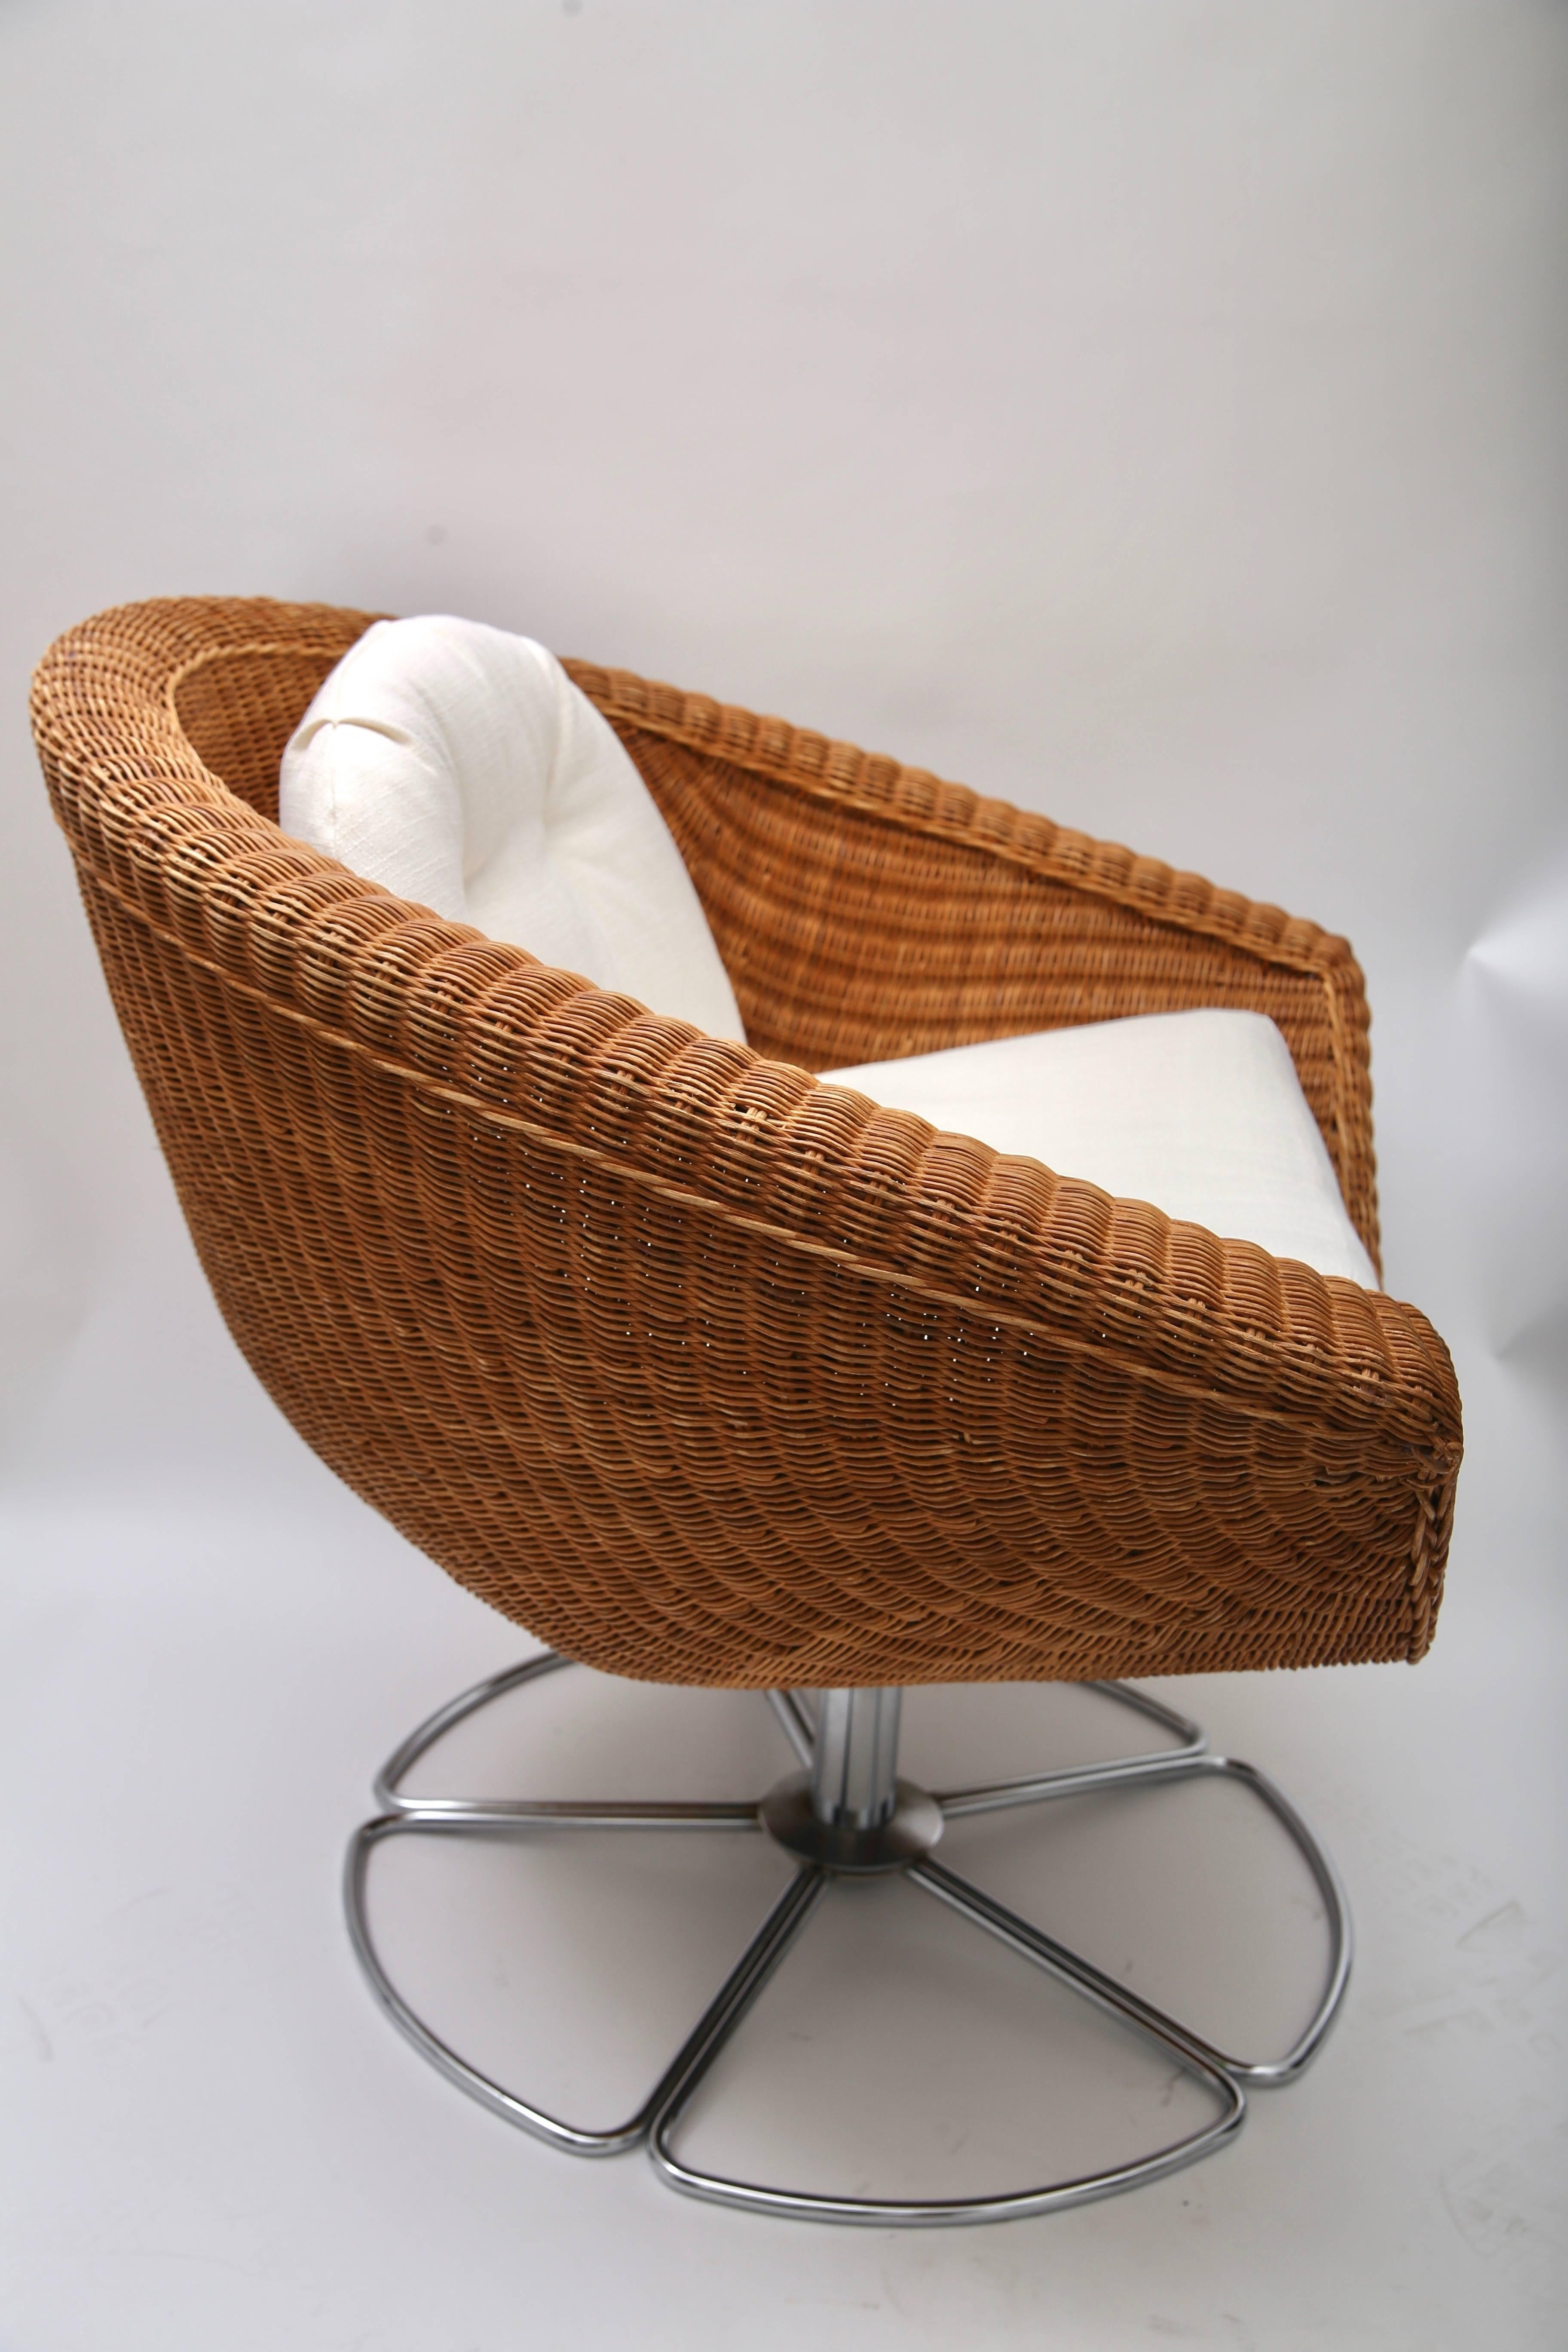 This stylish pair of wicker chairs will make the perfect addition to your summer bungalow, downtown loft or perhaps your pied-a-terre to add some Italian inspired Bohemian texture and mood.

The pieces swivel and the upholstery is newly done in an